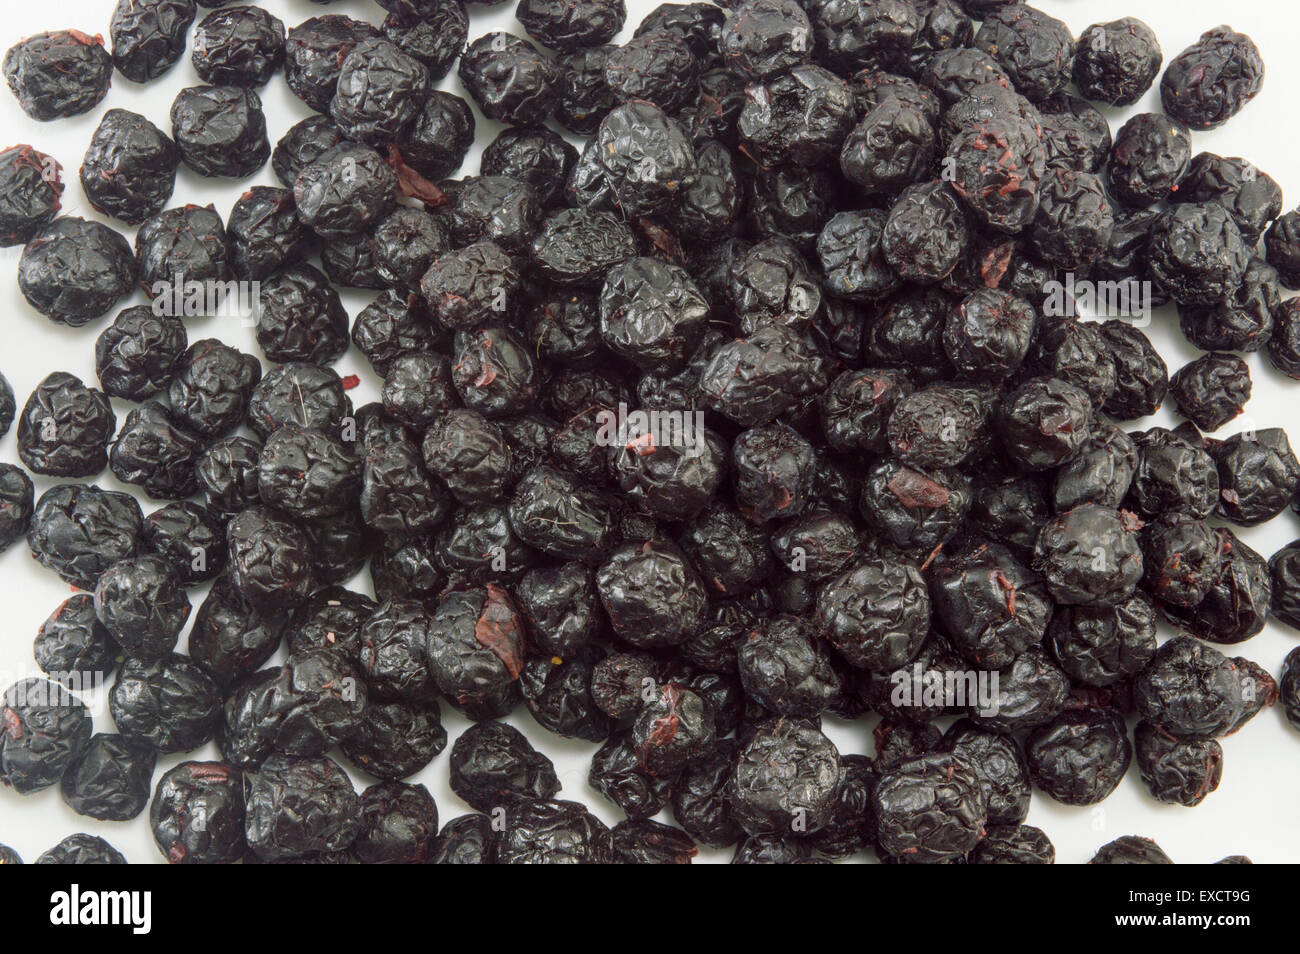 Bunch of dried aronia berries forming background Stock Photo